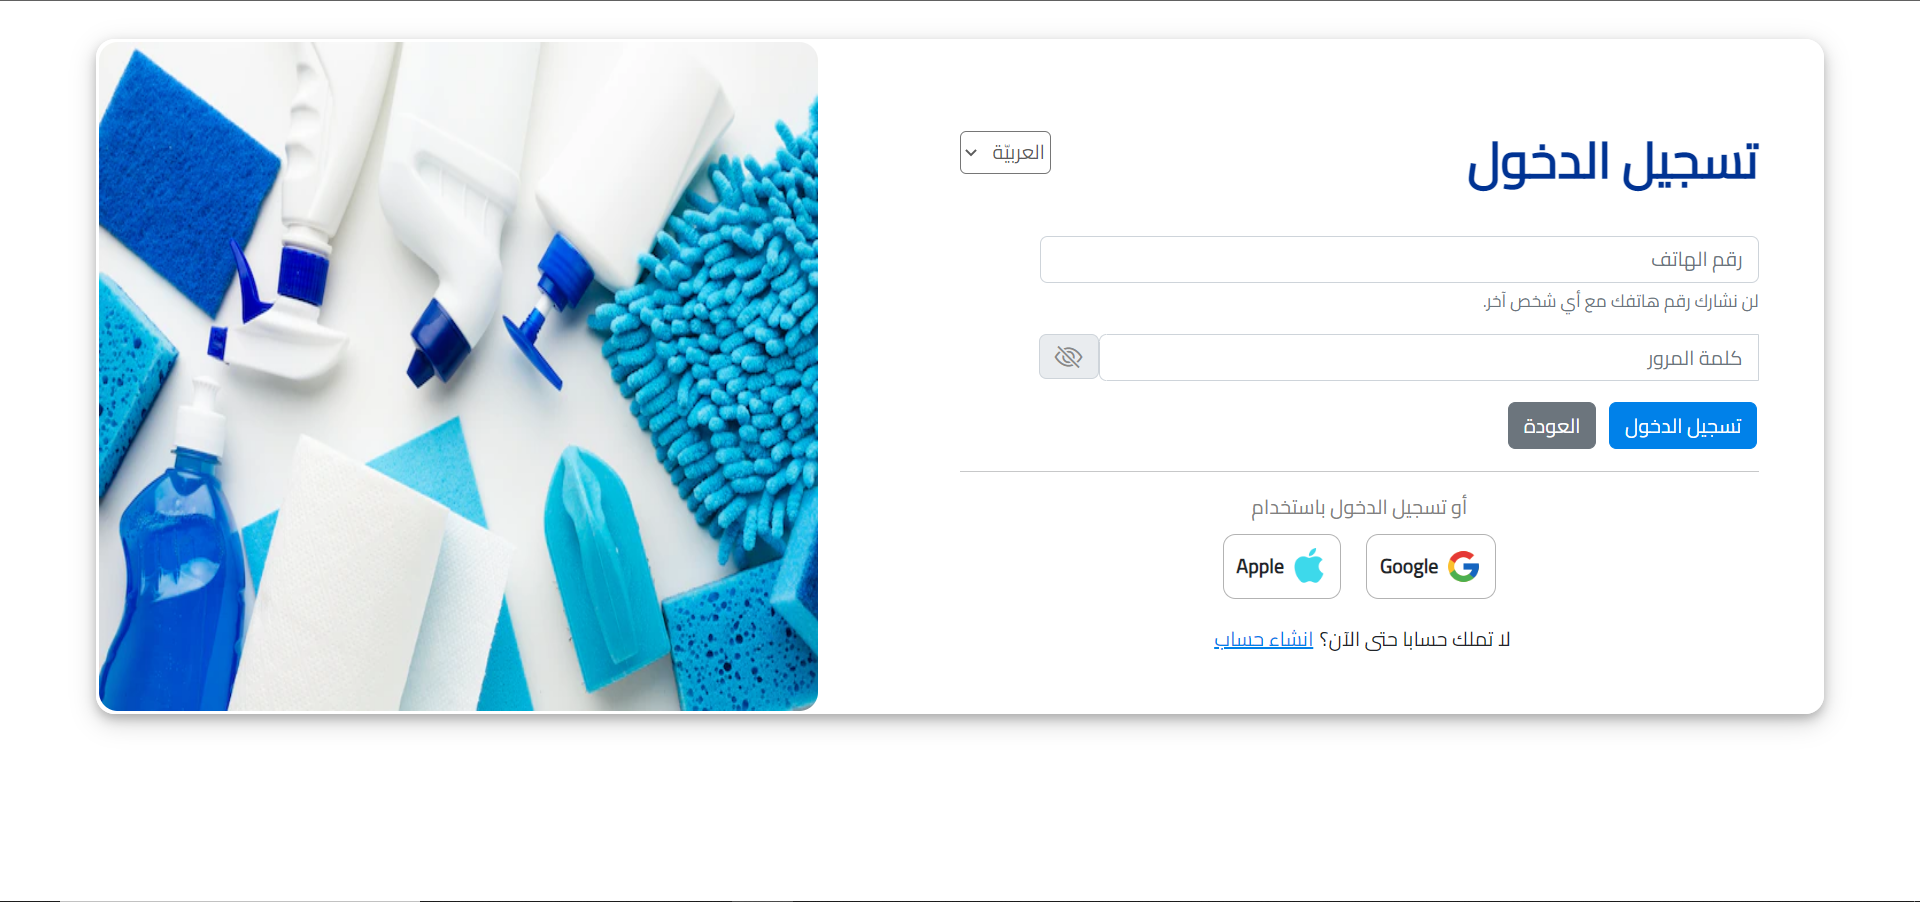 Saudi Cleaning Services (User Side)